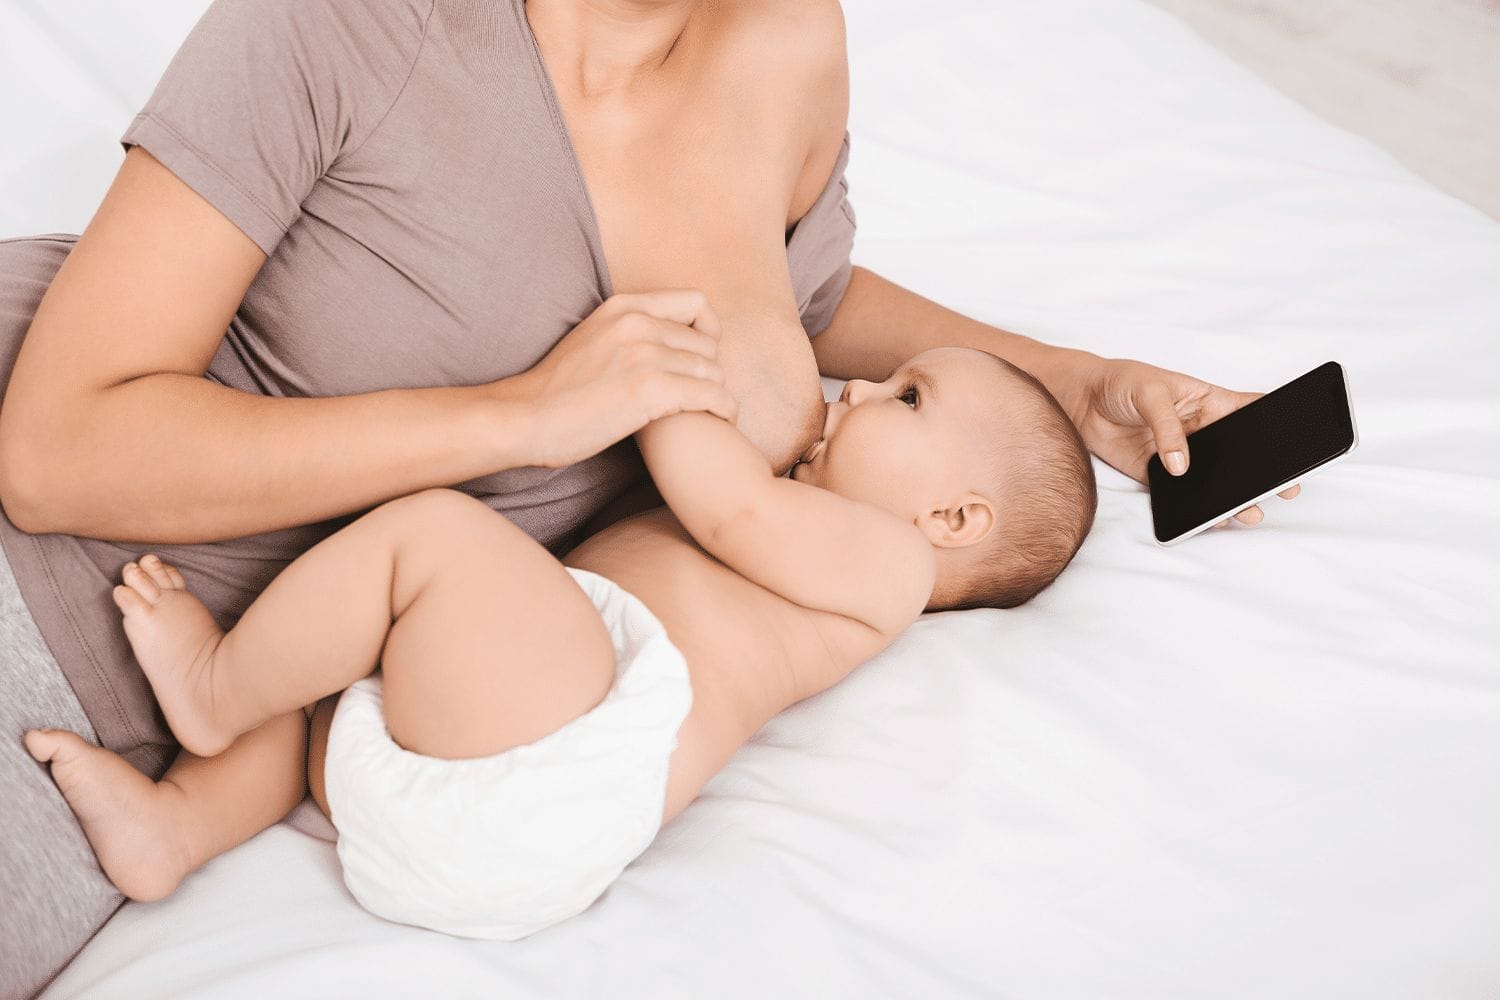 How to help your baby attach and breastfeed, Baby & toddler, Feeding  articles & support